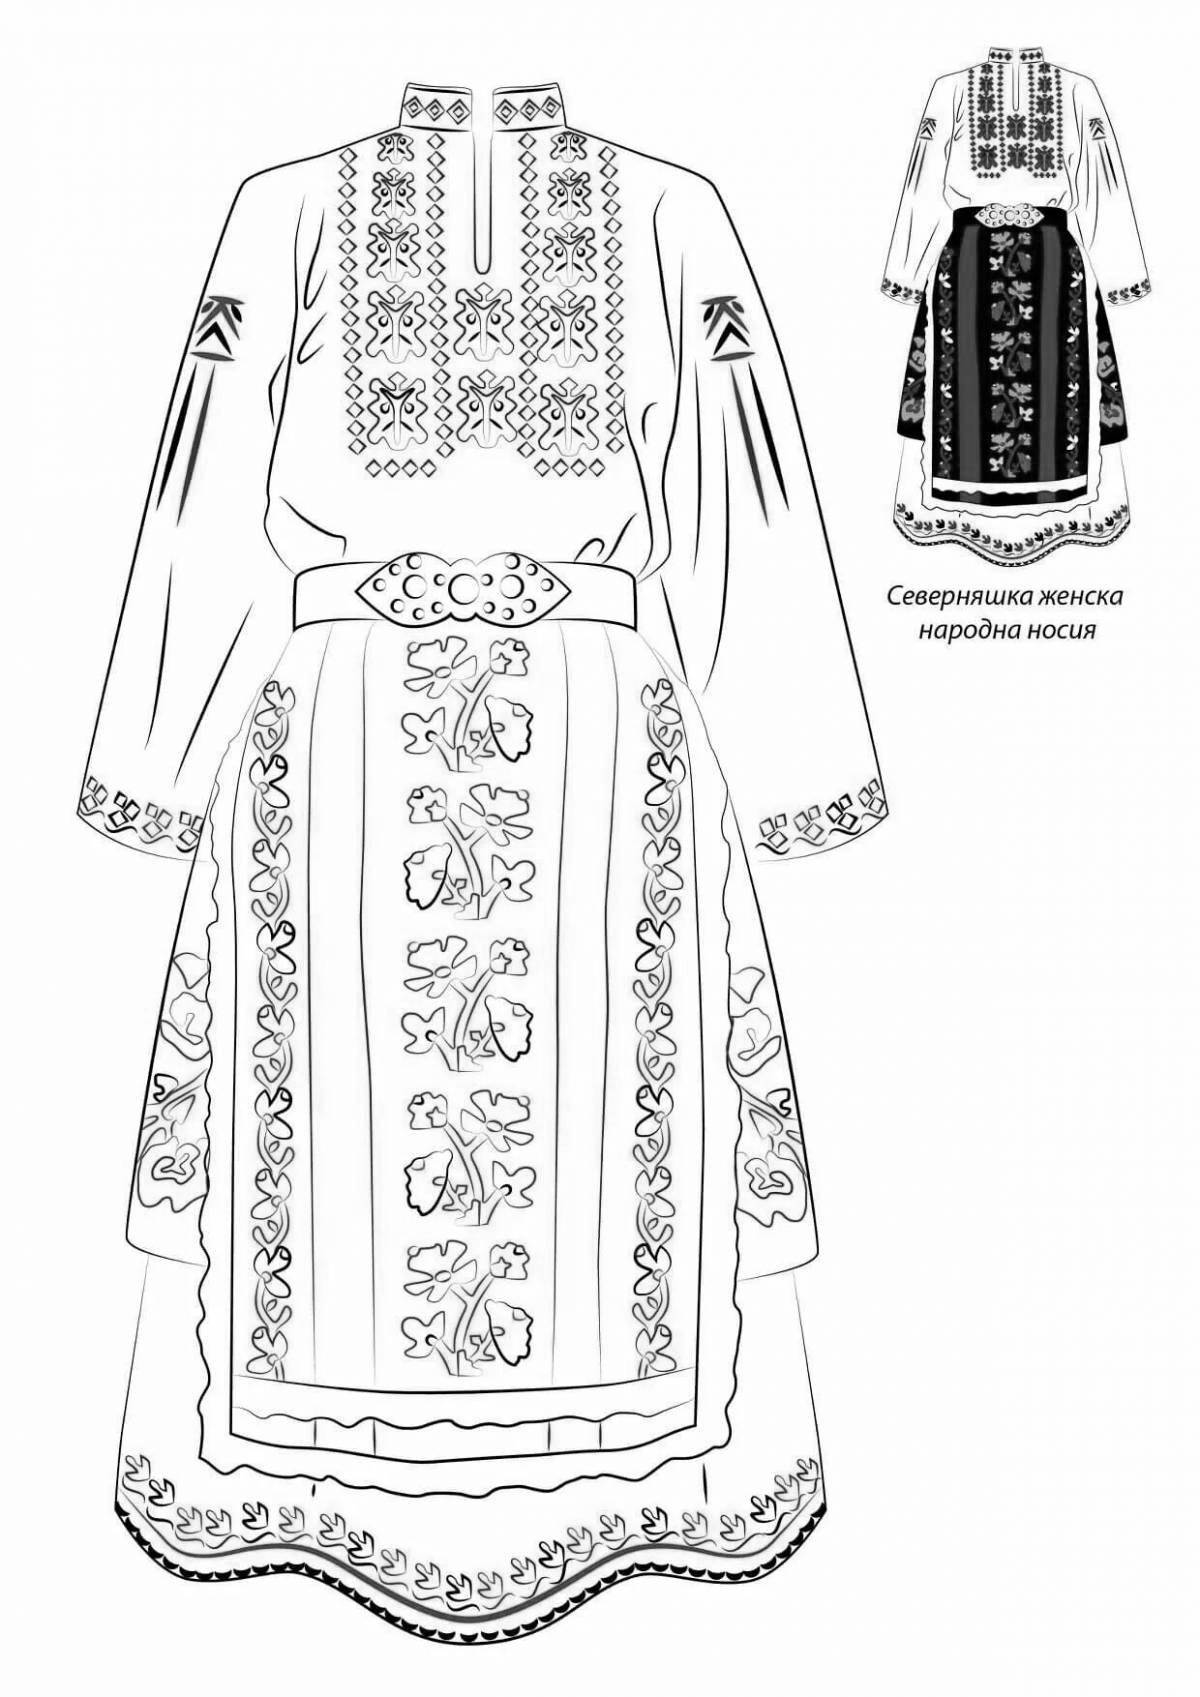 Coloring page decorated Ukrainian national costume